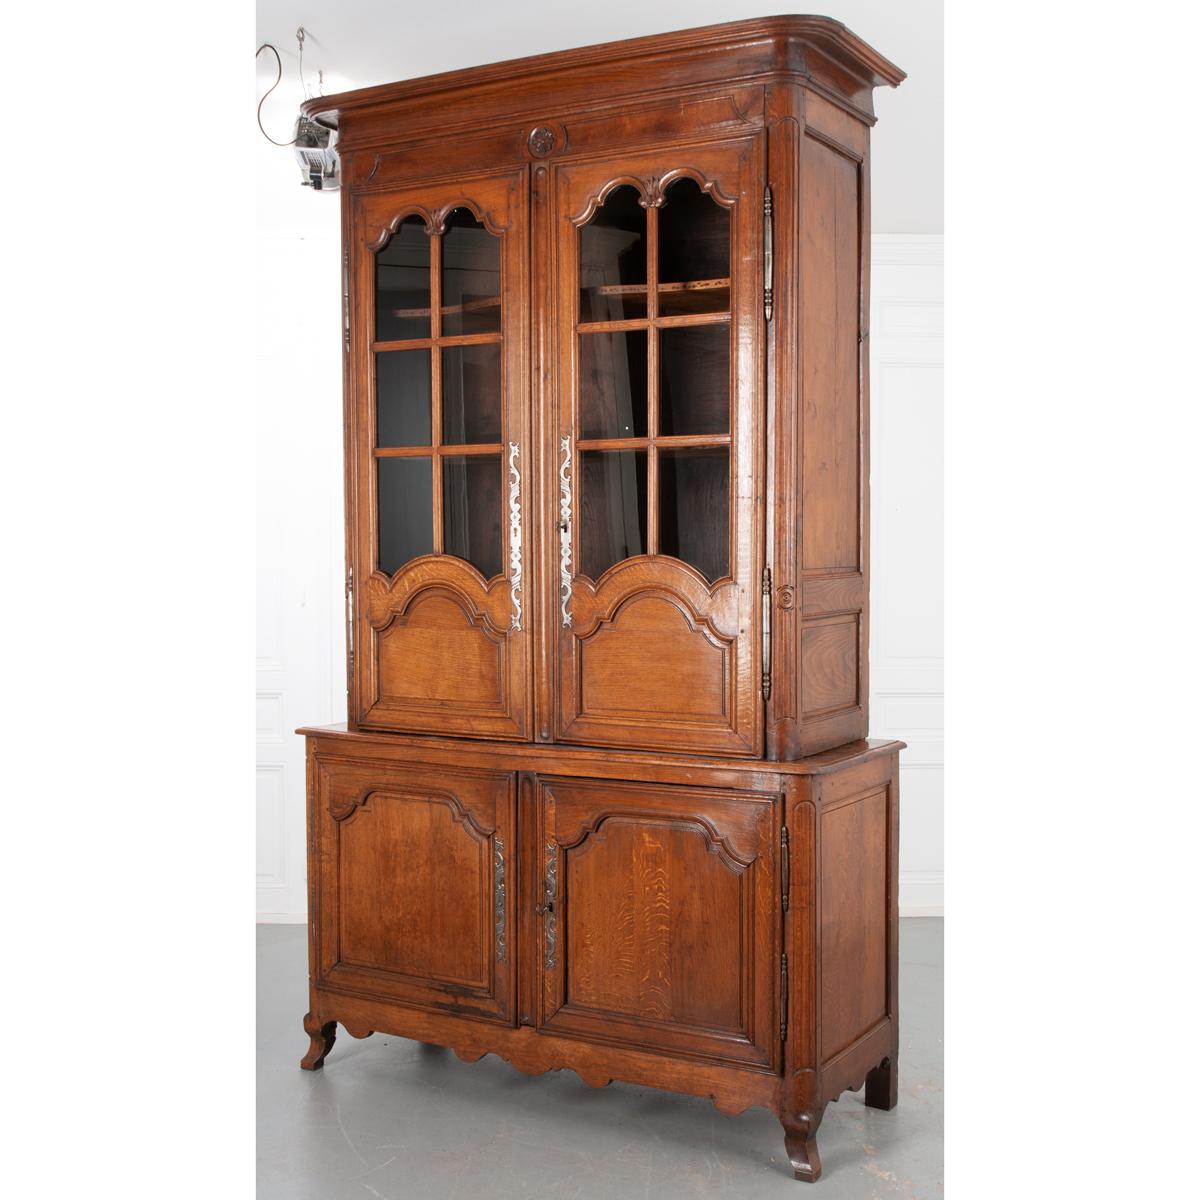 This is a massive Buffet a Deux Corps from 19th century France. Constructed with warm solid oak, the top portion measures 68”H x 54-⅜”W x 21-¼”D and the bottom measures 38-⅓”H x 63-¼”W x 24”D. Topped with a protruding rounded cornice and a lovely